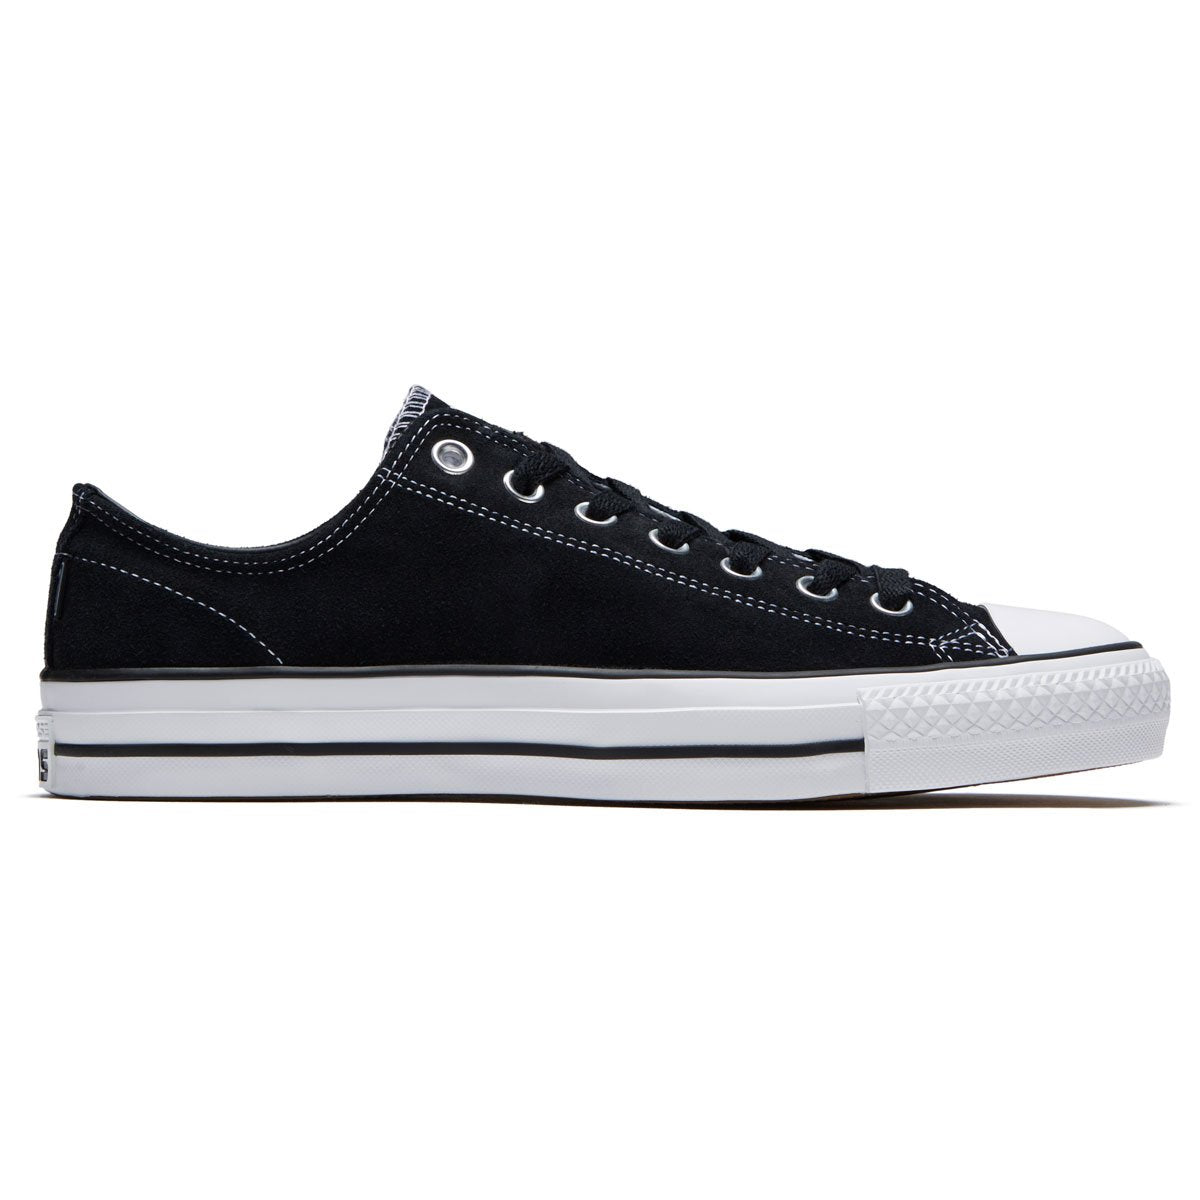 Converse Taylor All Star Pro Suede Ox Shoes - Black/Black/White CCS